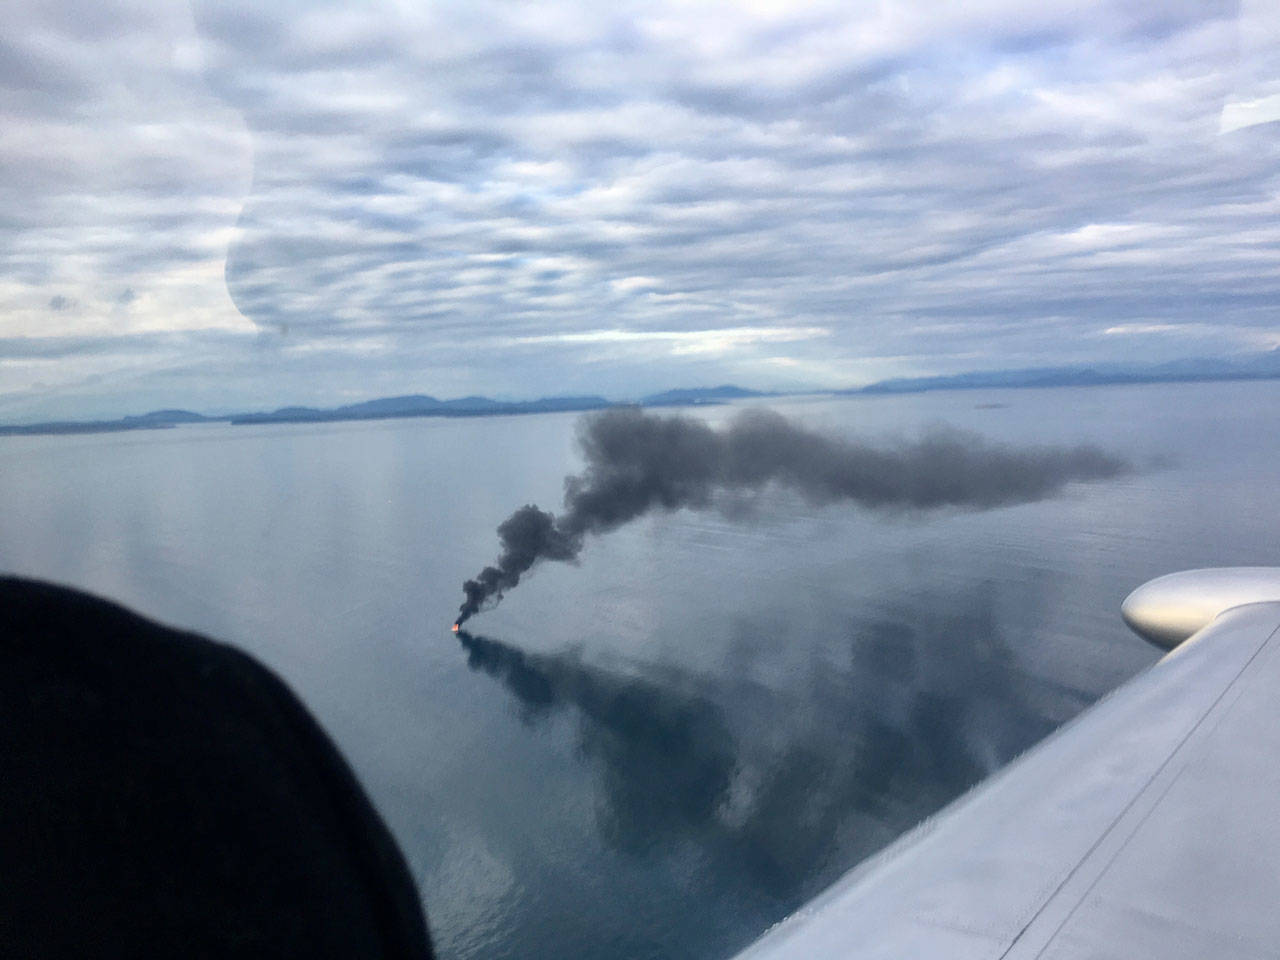 This yacht burned and sank off the west coast of Whidbey Island on Thursday. (Ruth Garasi)